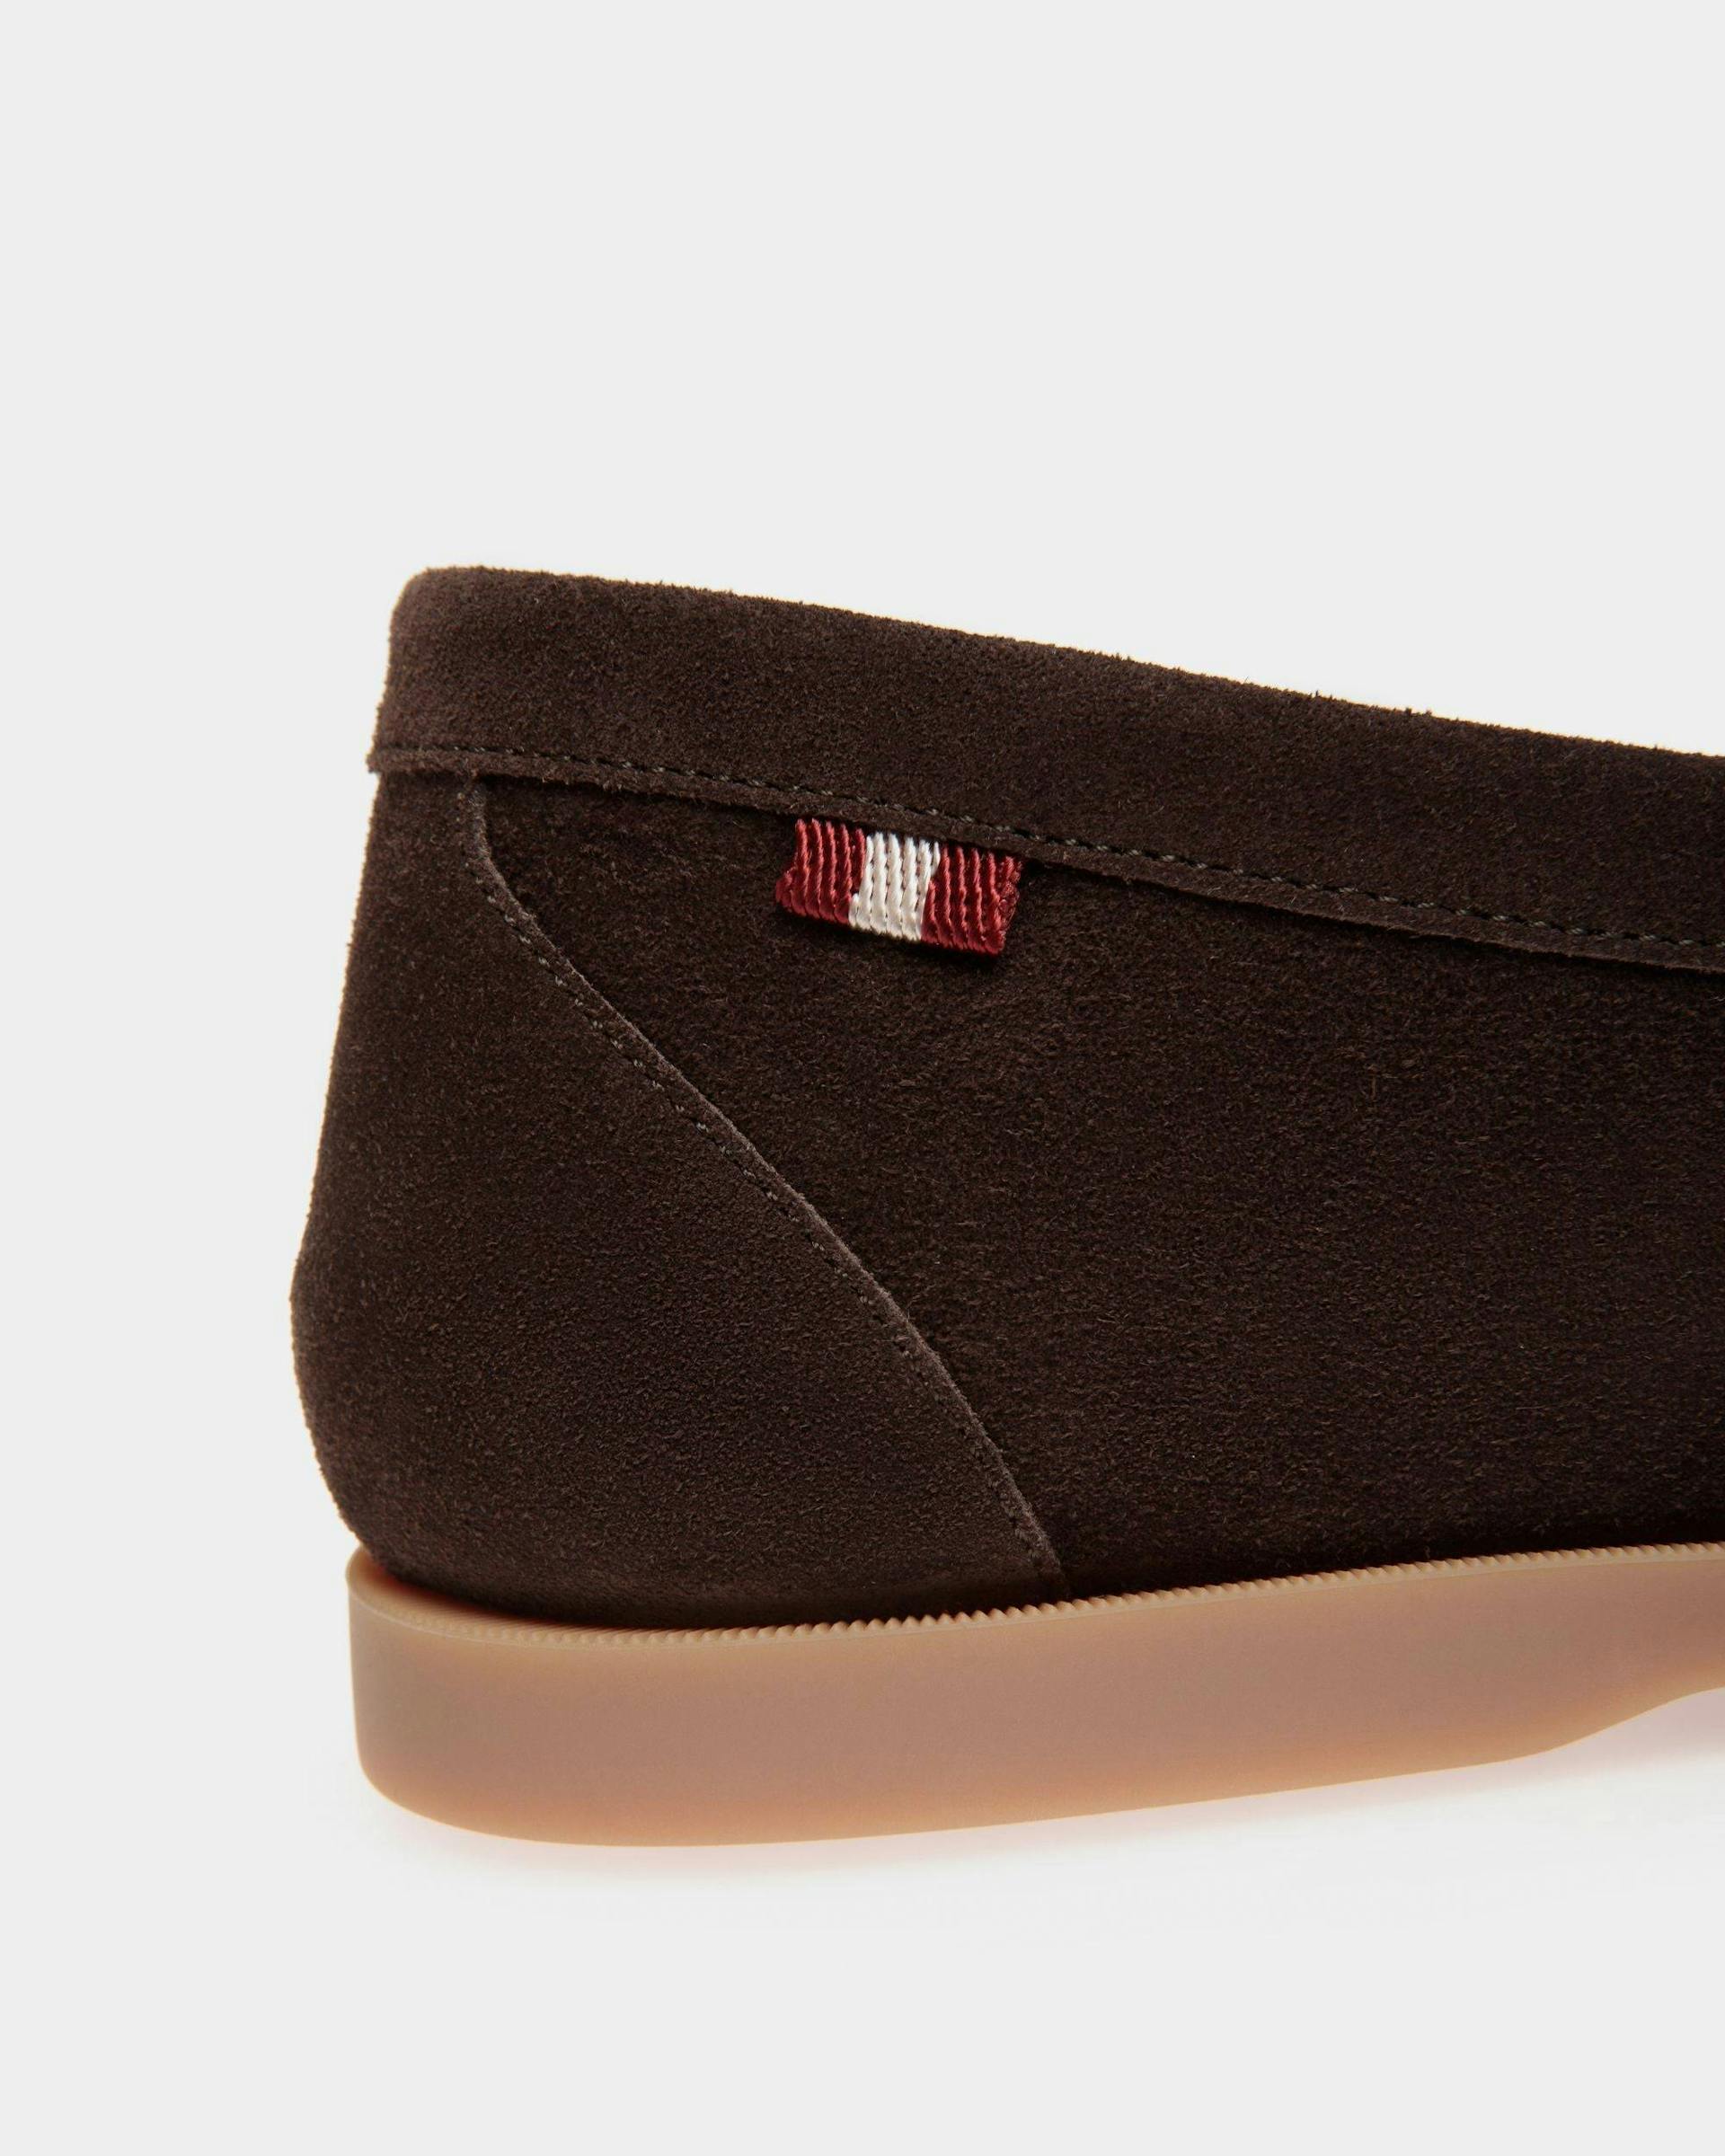 Men's Nelson Loafer in Brown Suede | Bally | Still Life Detail